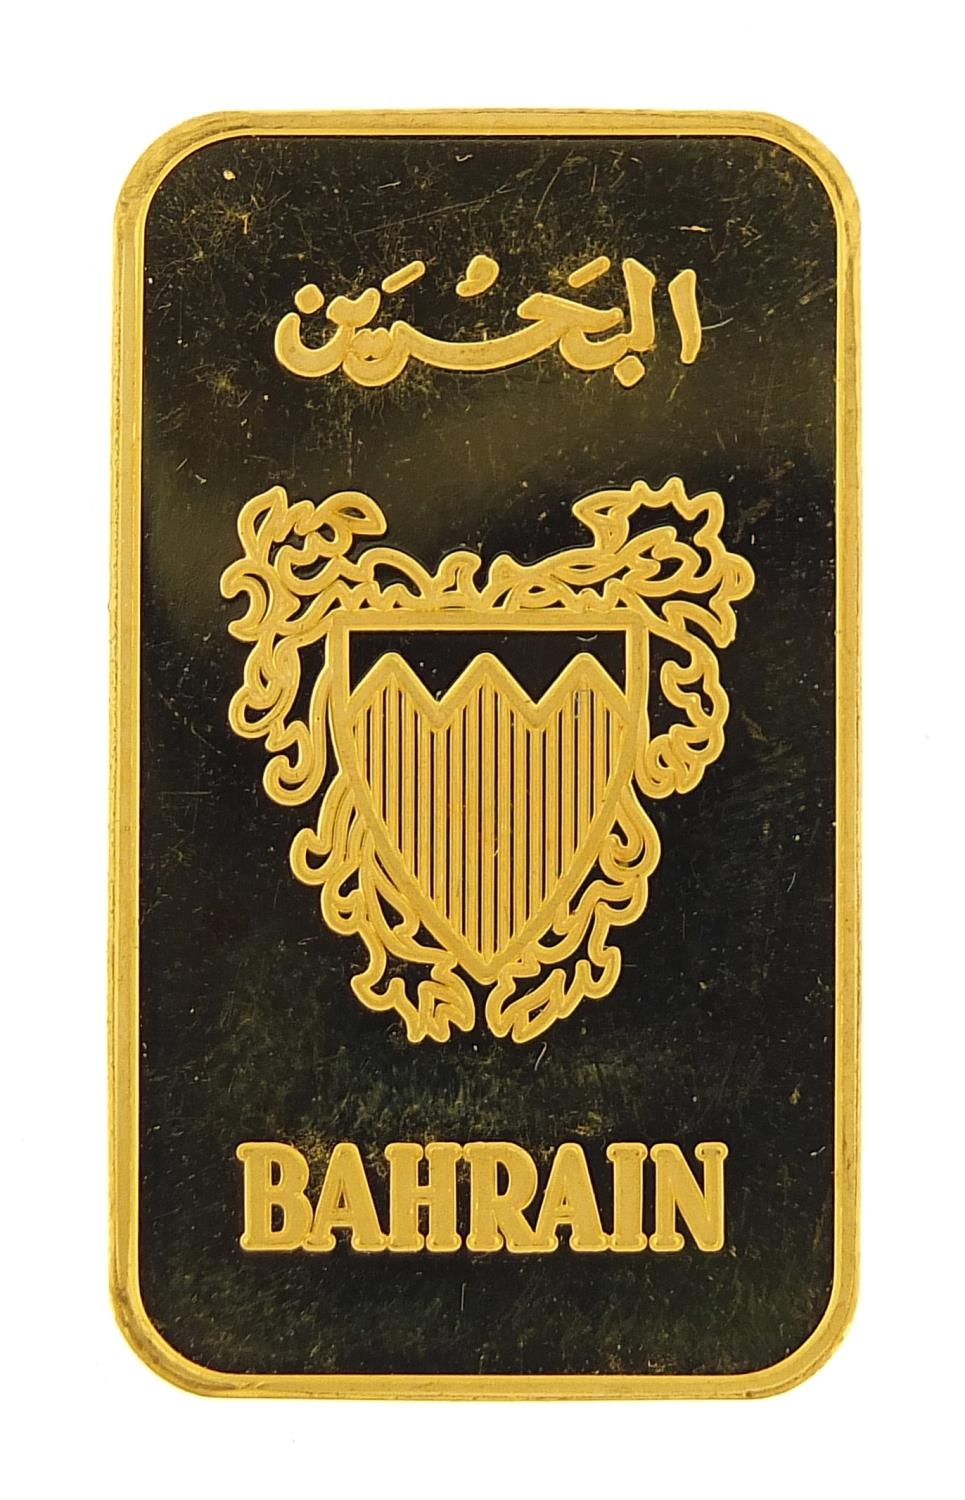 Bahrain 999.9 fine gold 20g gold ingot - this lot is sold without buyer?s premium, the hammer